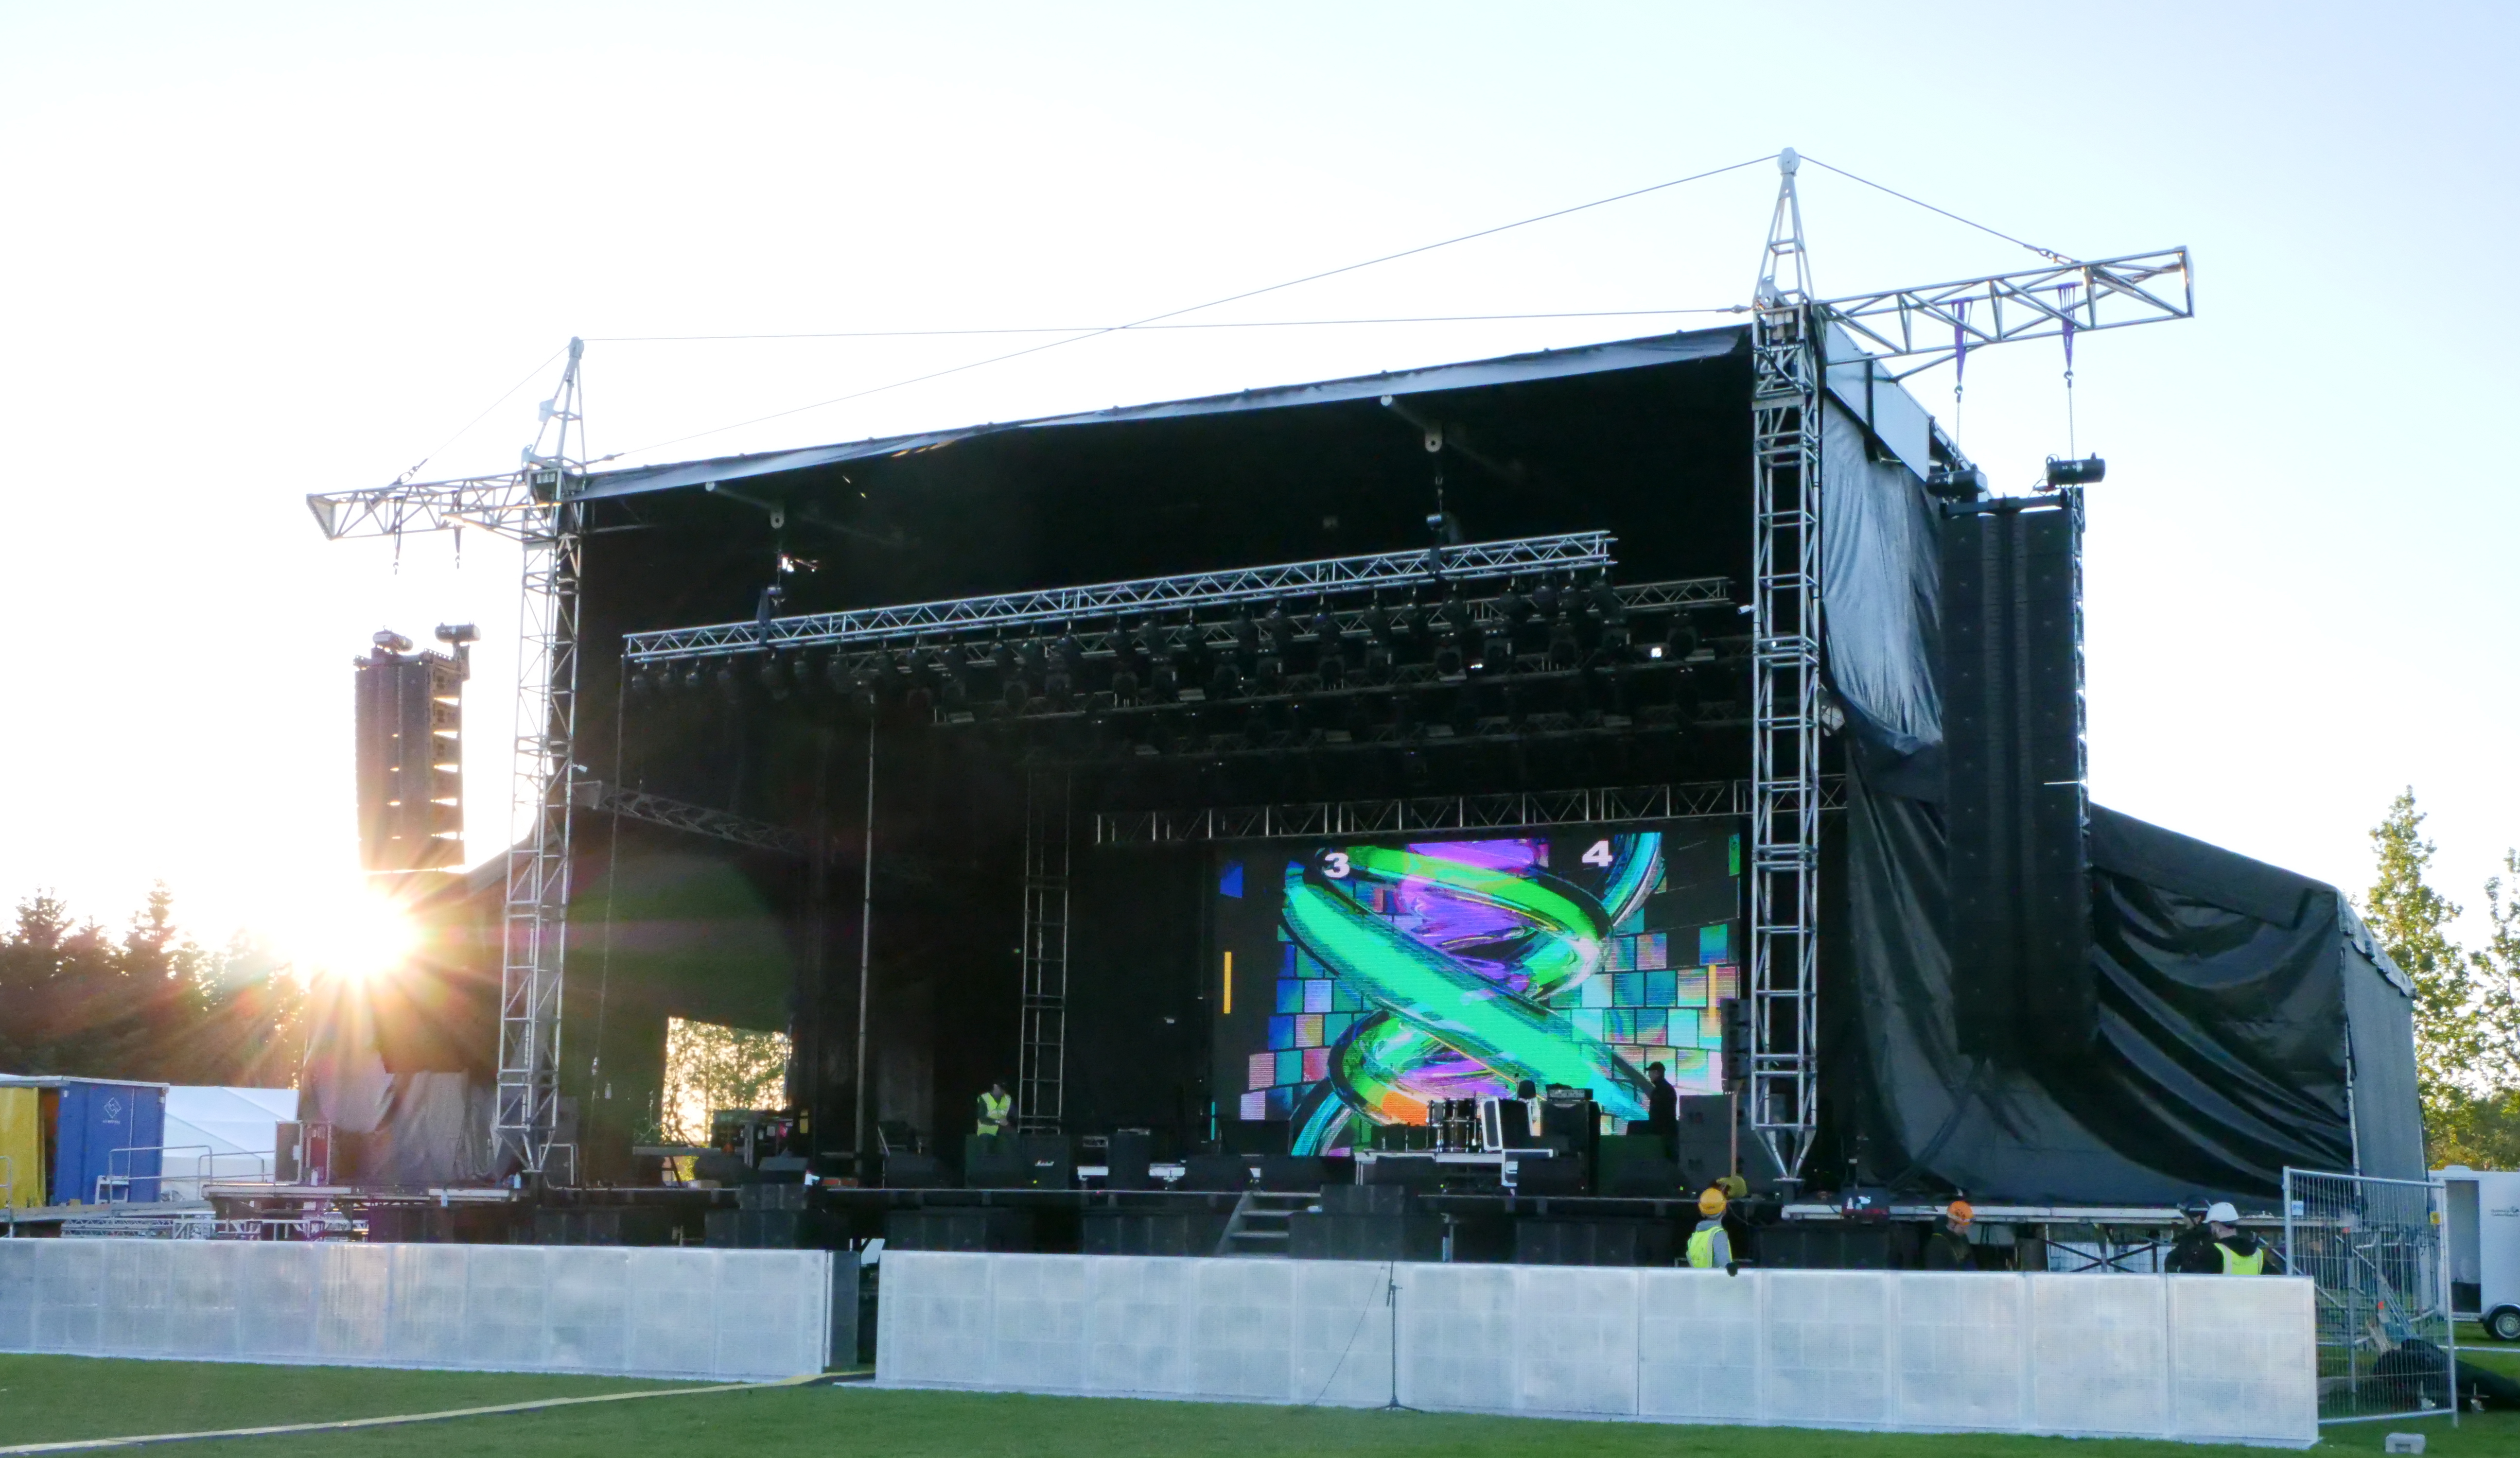 Iceland’s Secret Solstice Music Festival Delivers Enchanting Sound and Lighting with HARMAN Professional Solutions